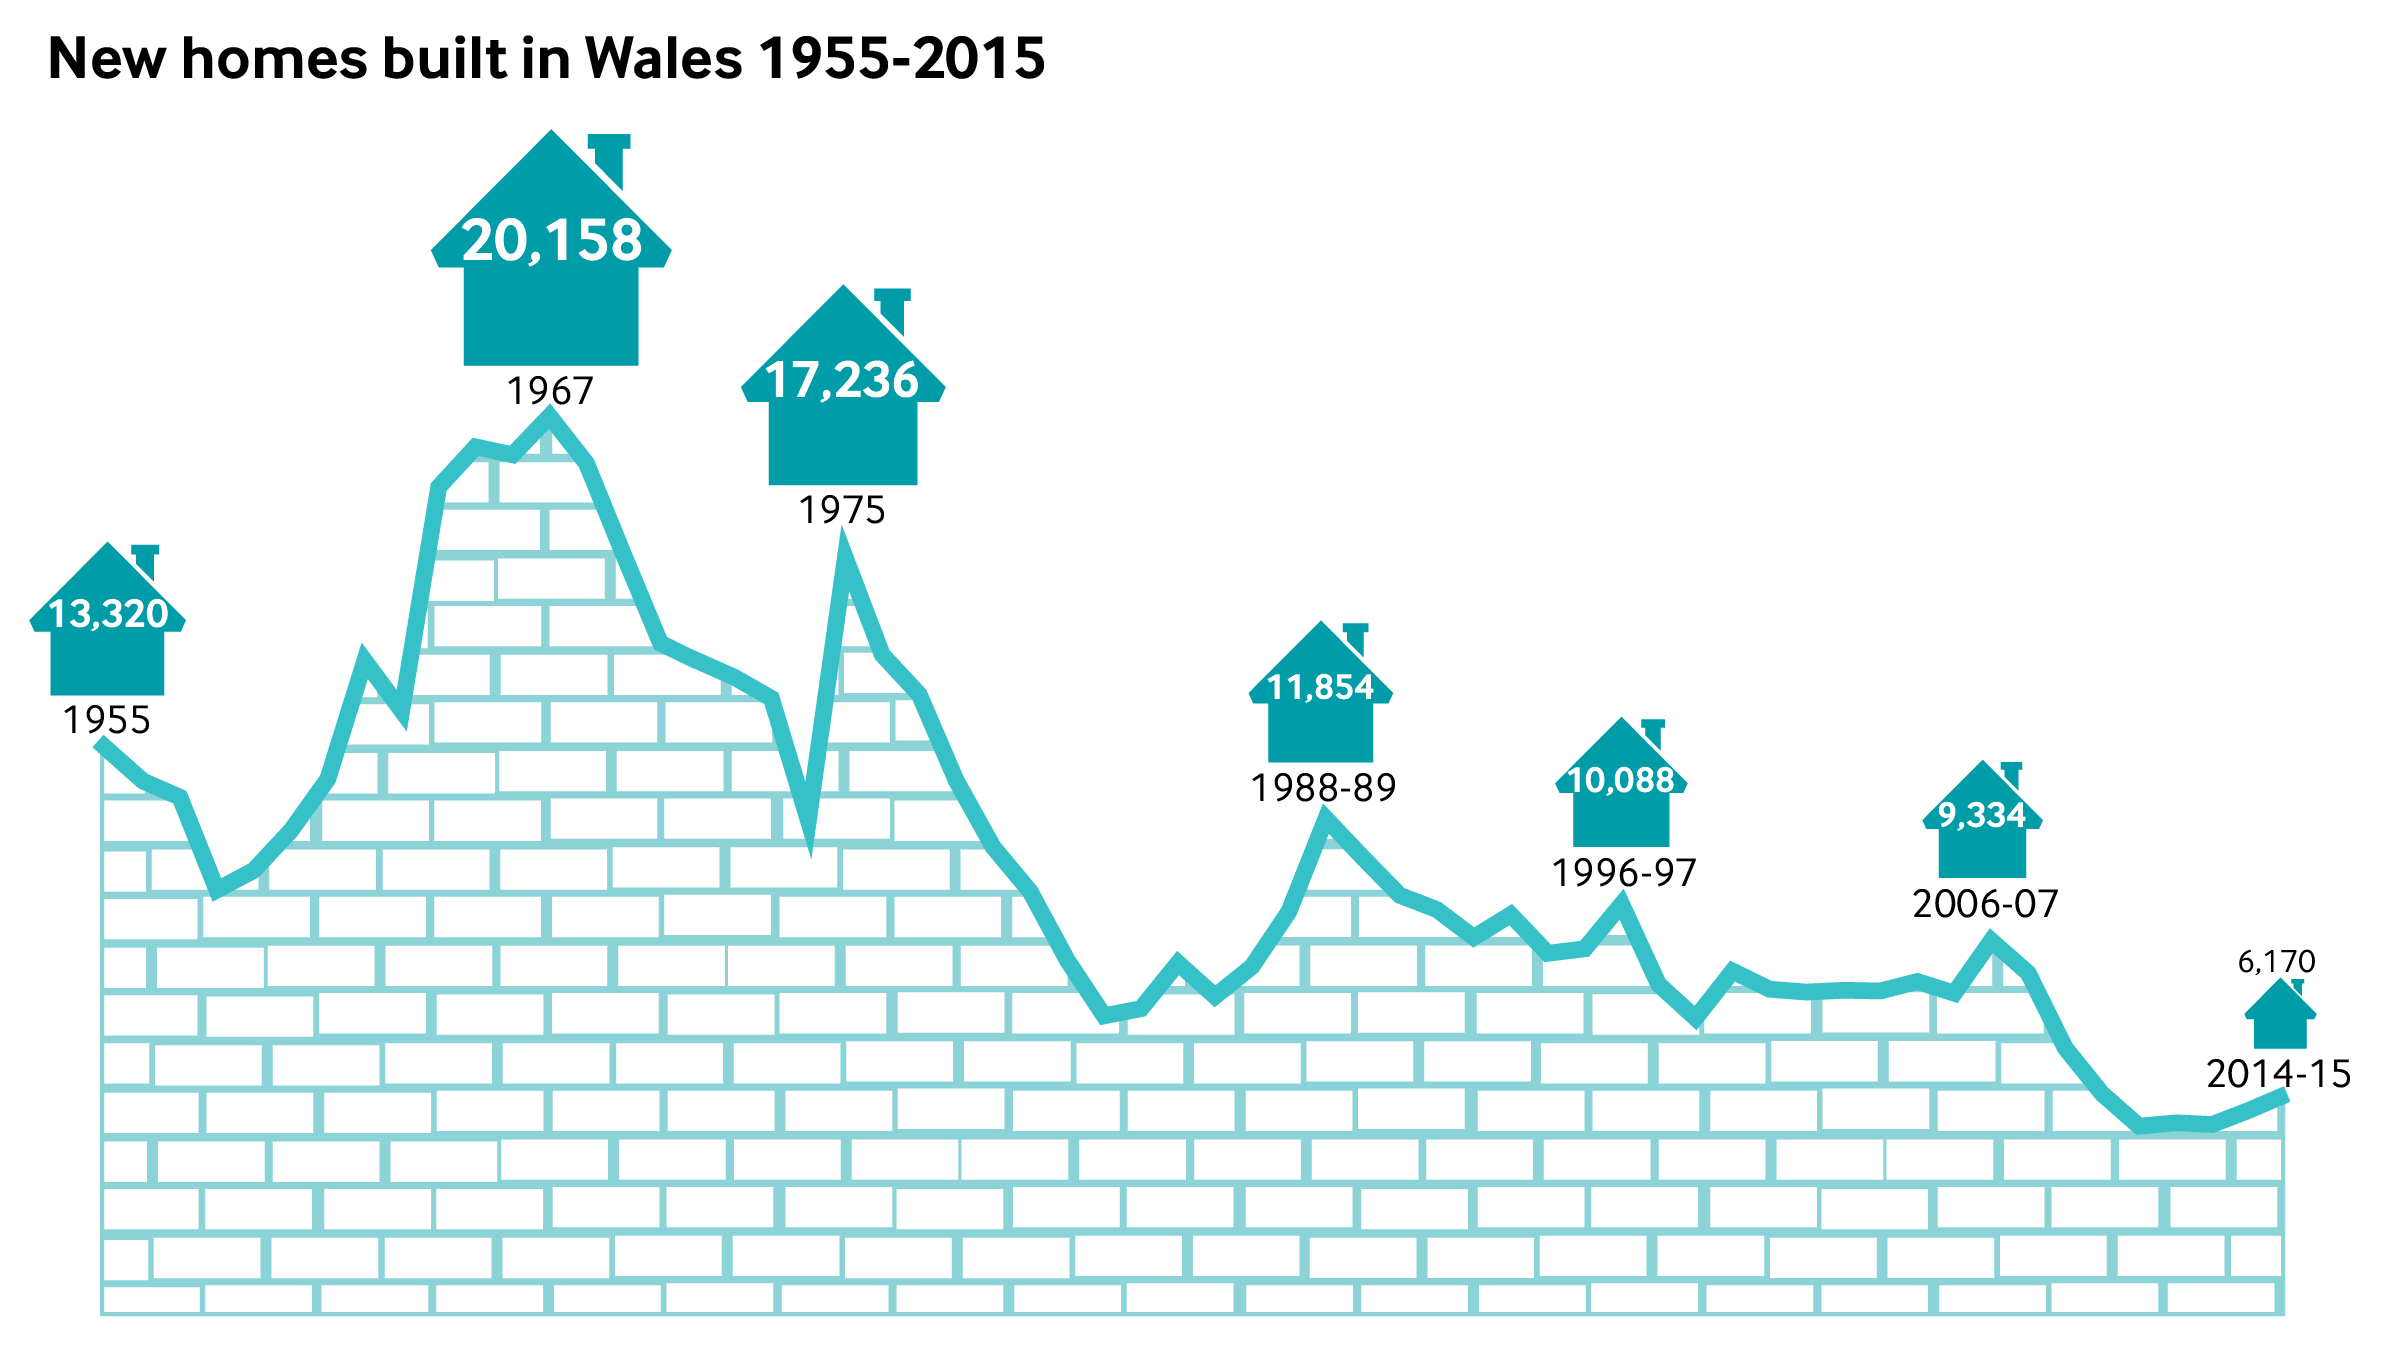 New homes built in Wales 1955-2015